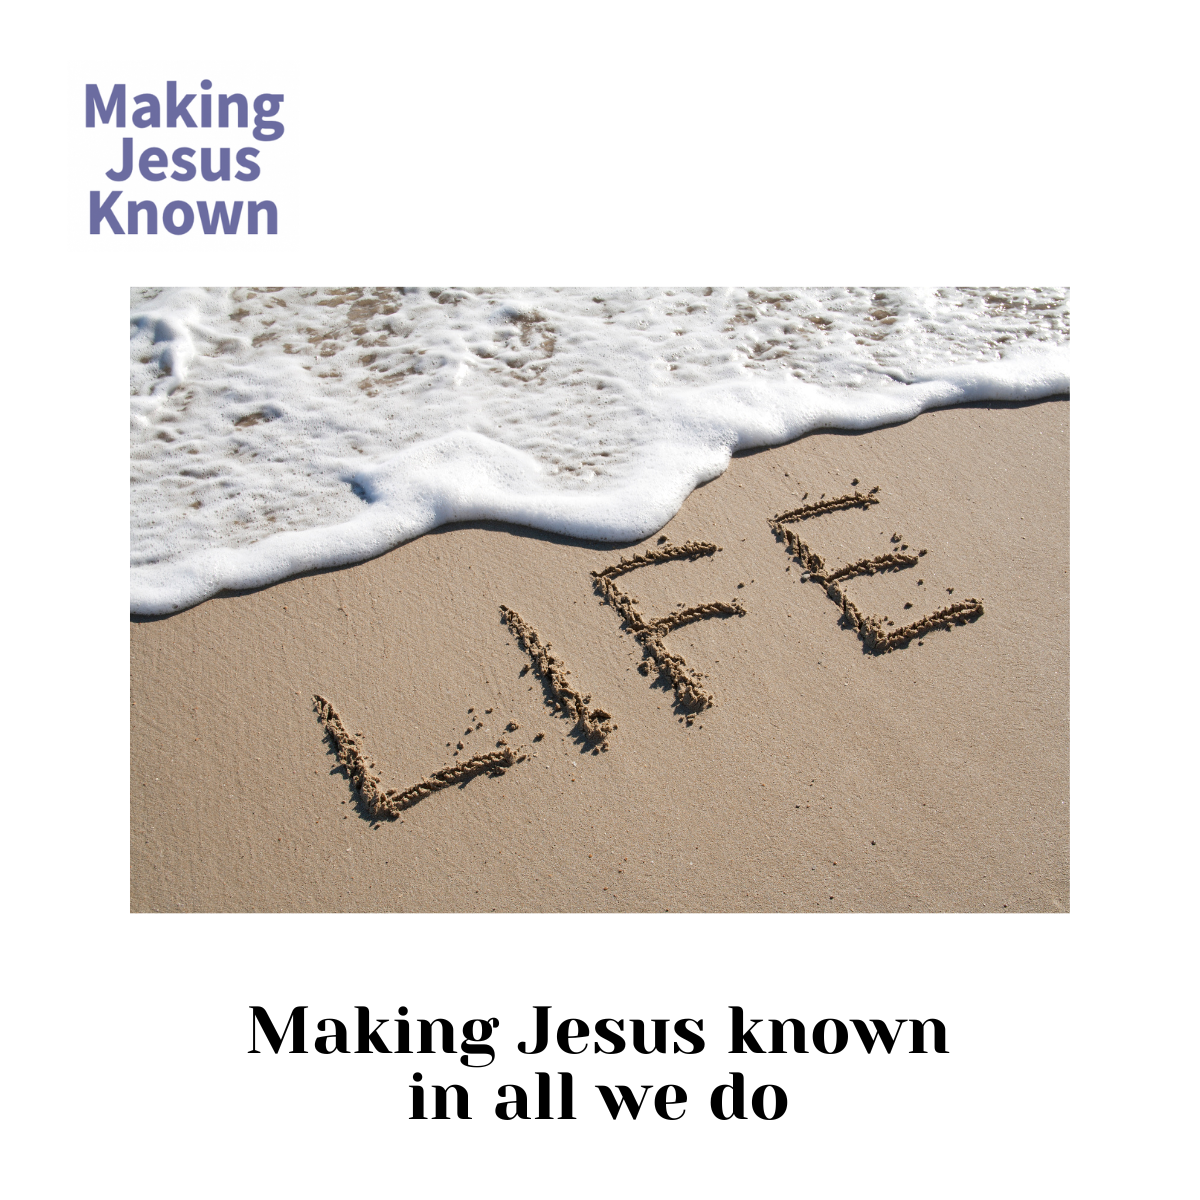 Making Jesus known in all we do